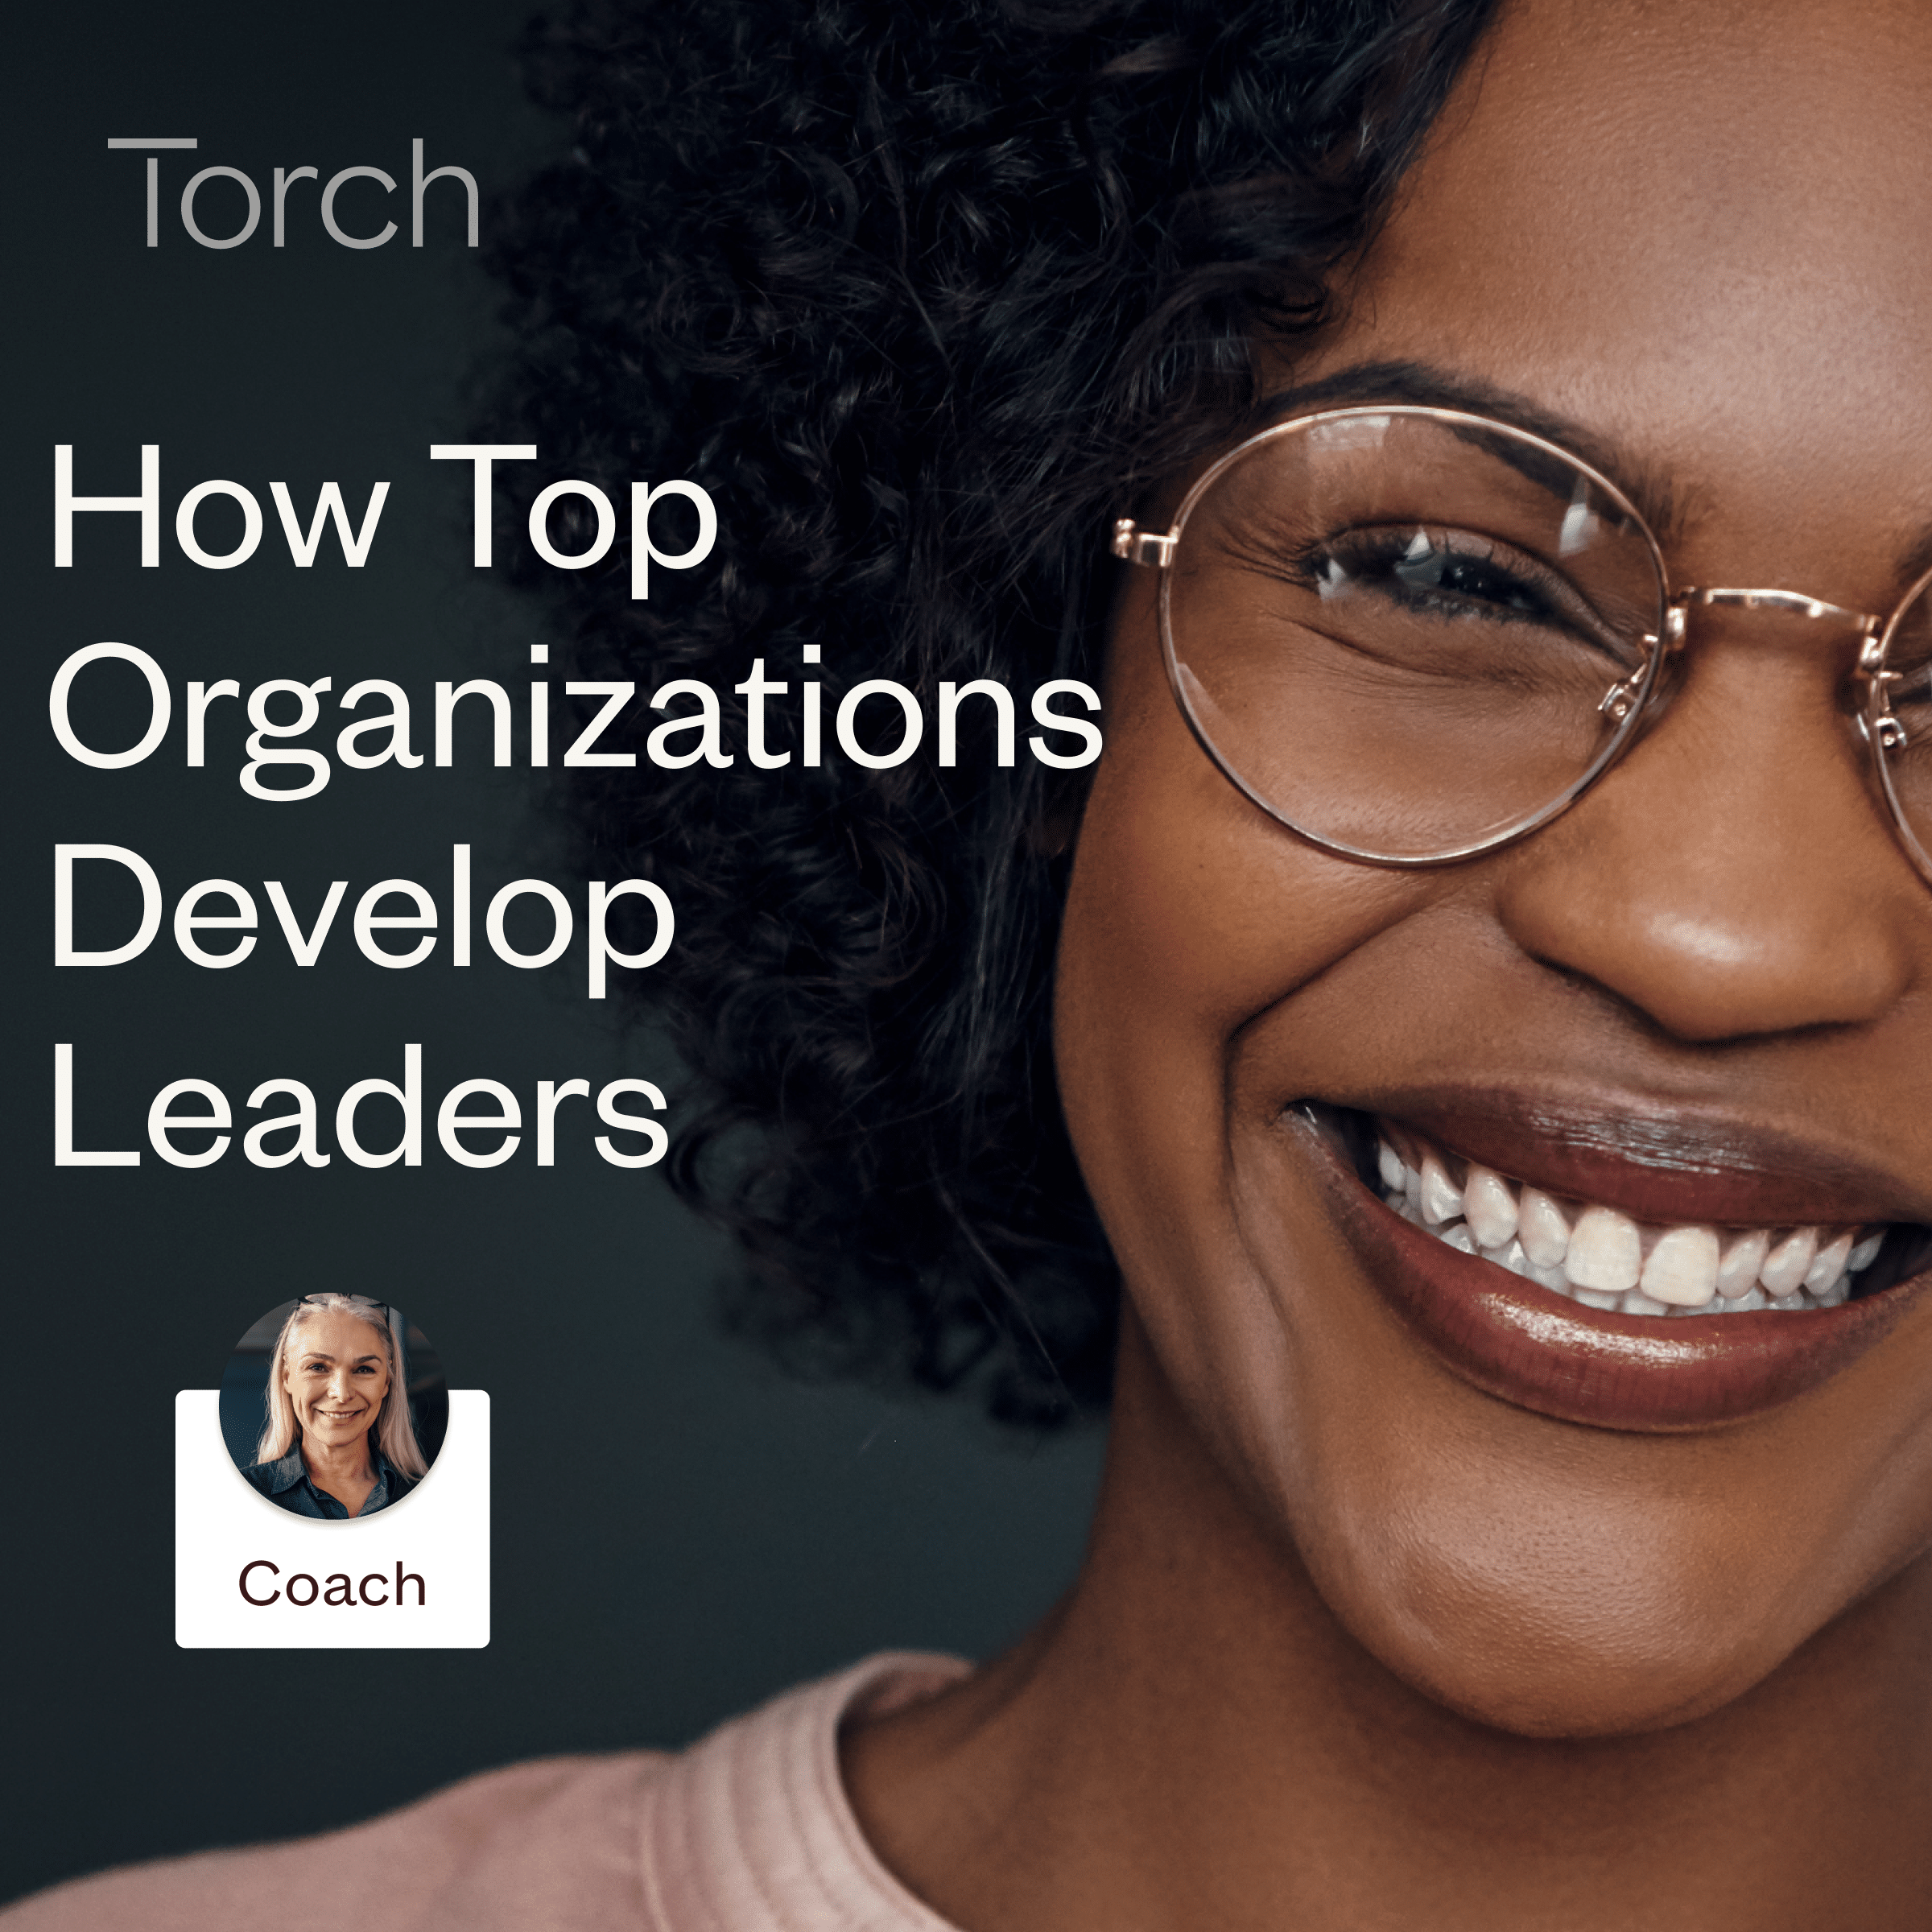 How Top Organizations Develop Leaders